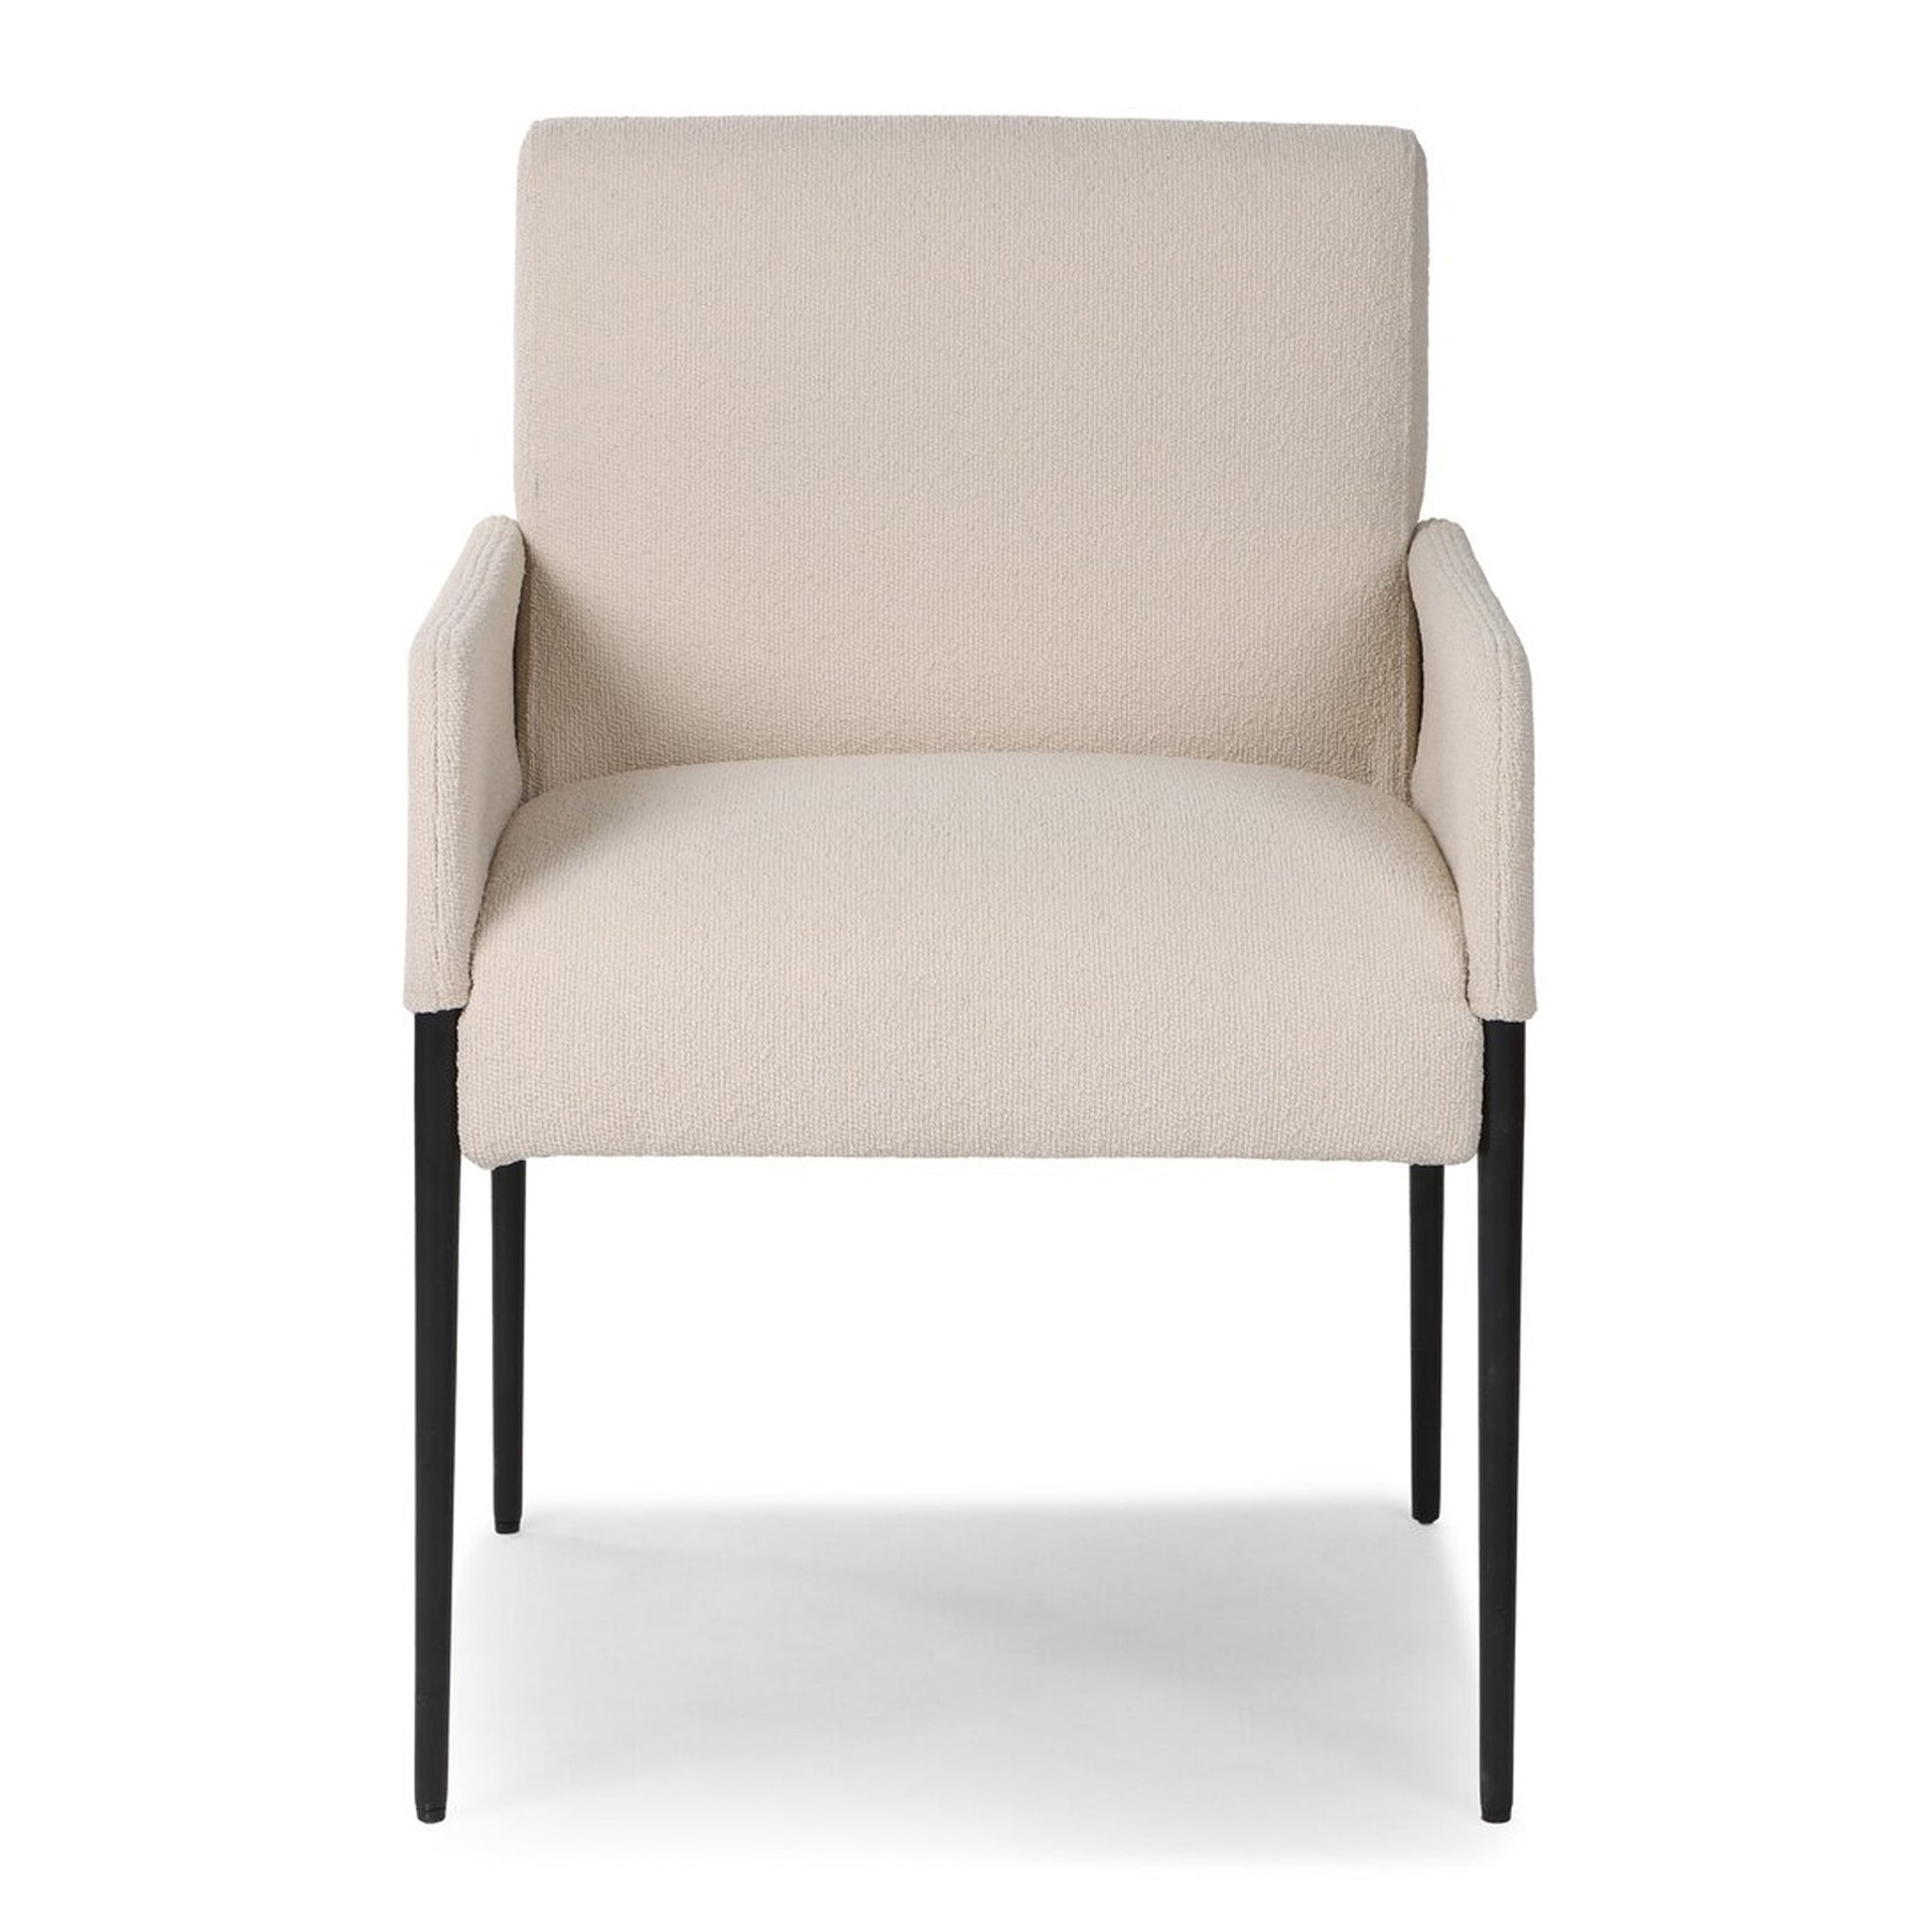 Max Upholstered Dining Chair with Armrest - IONS DESIGN